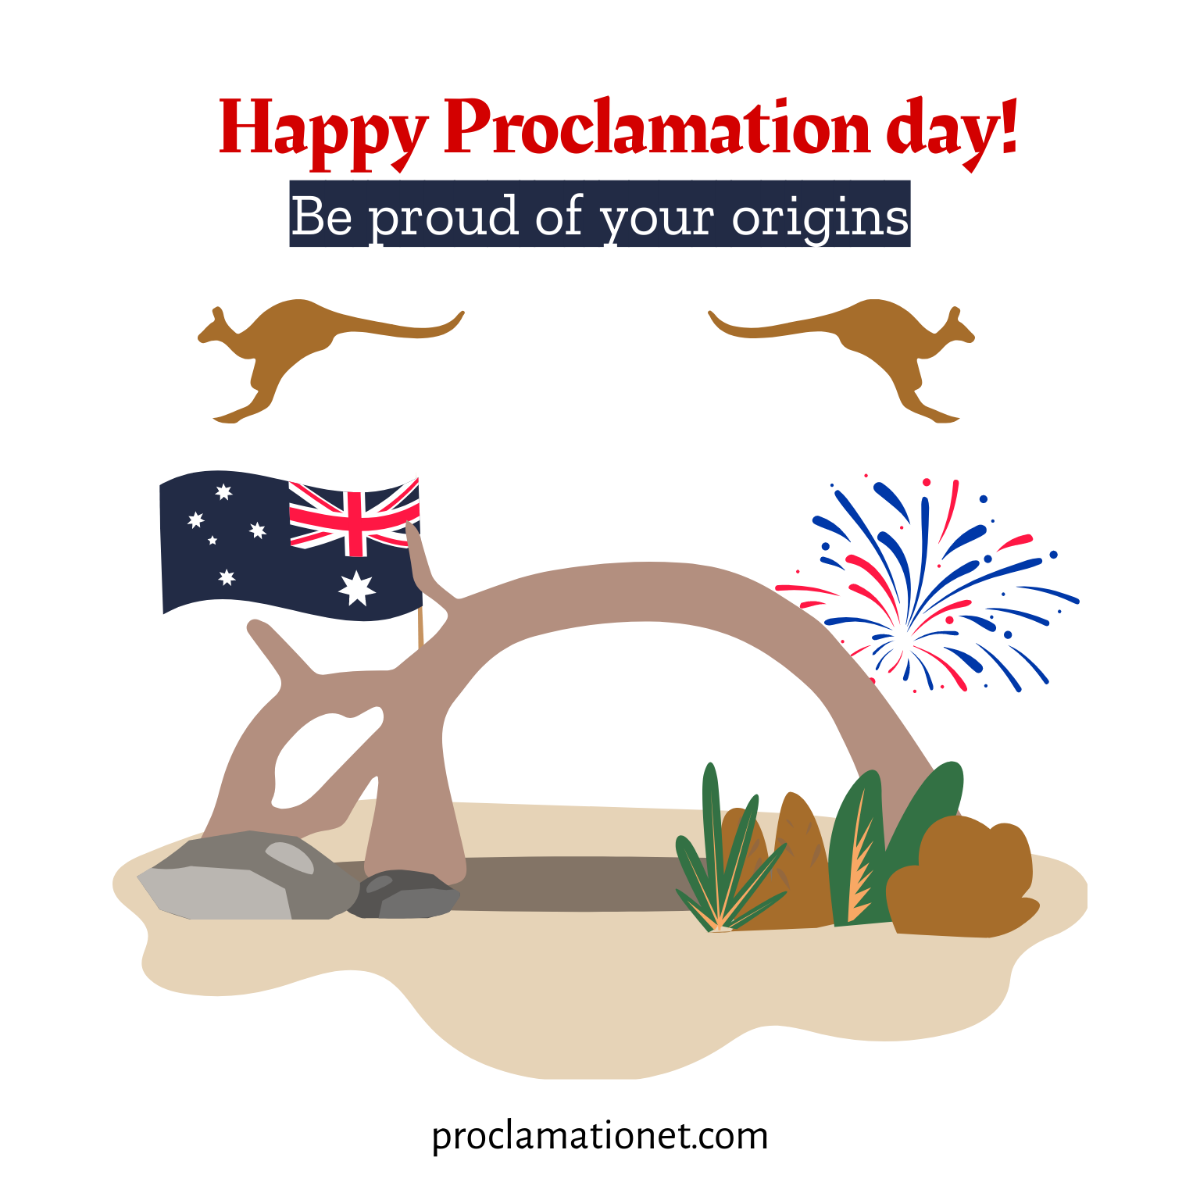 Free Proclamation Day Flyer Vector Template